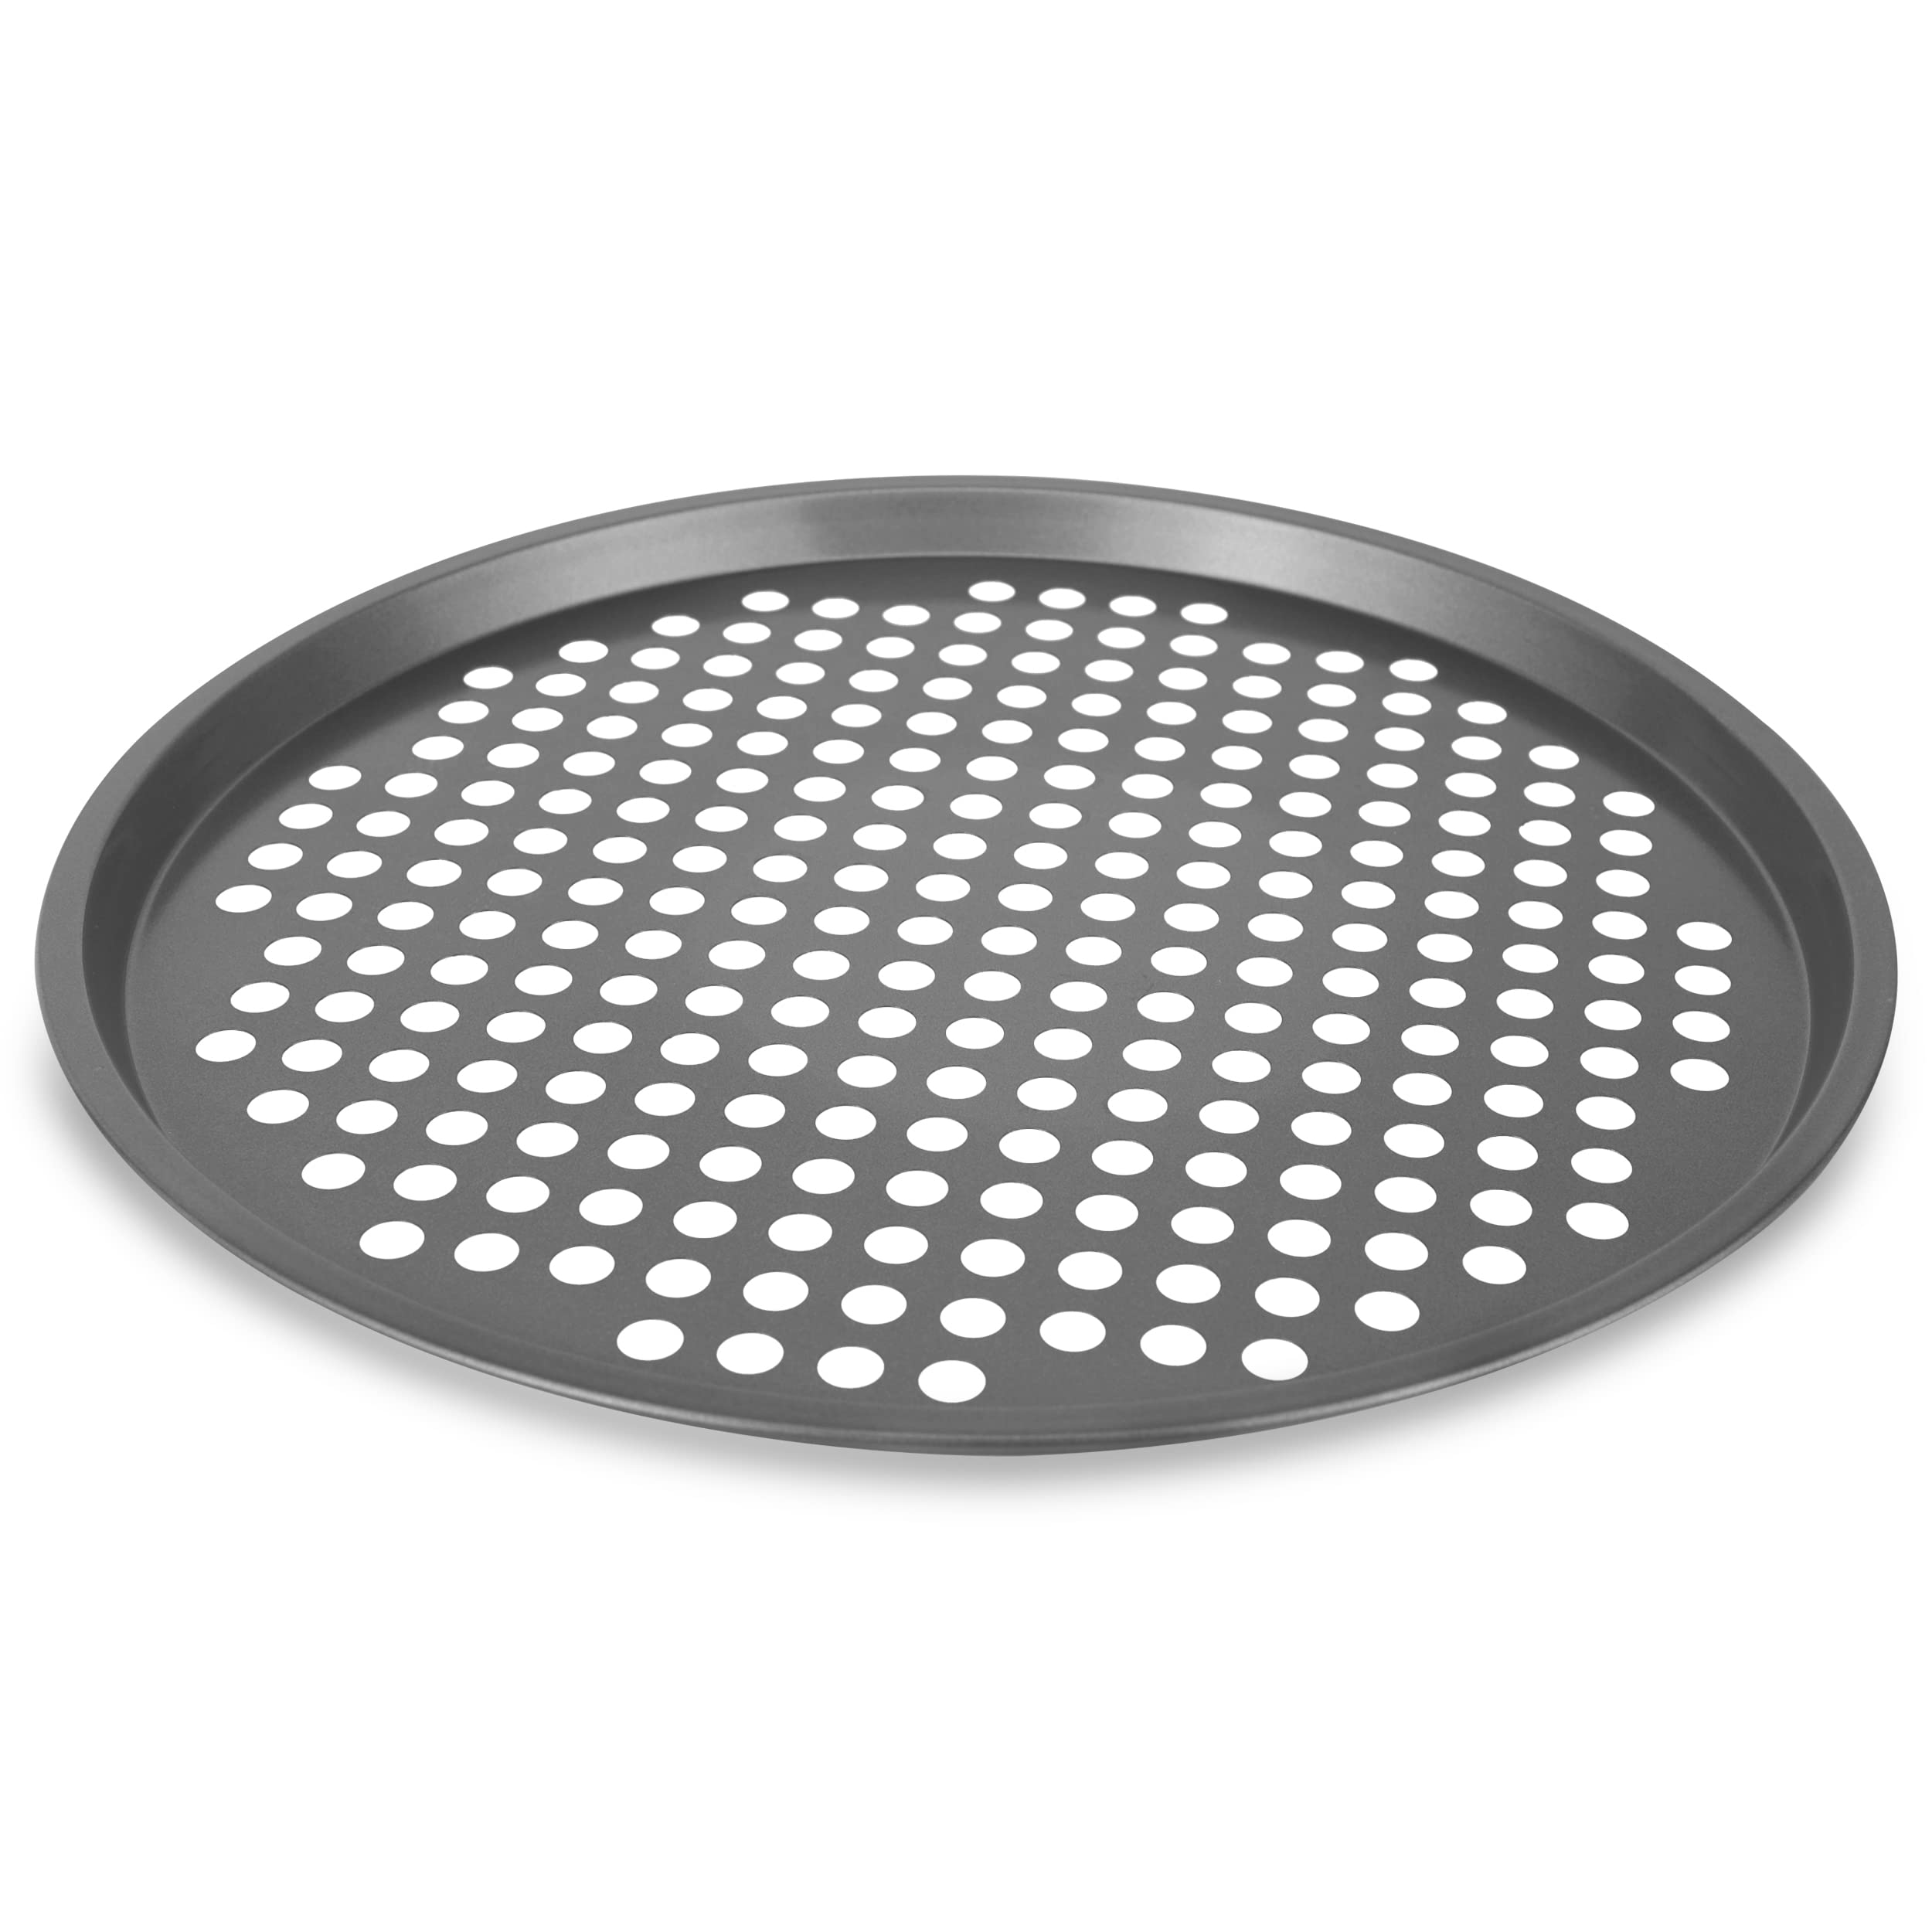 NutriChef 14” Non Stick Pizza Pan, Gray Carbon Steel Bake Pan, Commercial Grade Restaurant Quality Metal Bakeware, Compatible with Model NCBS10S